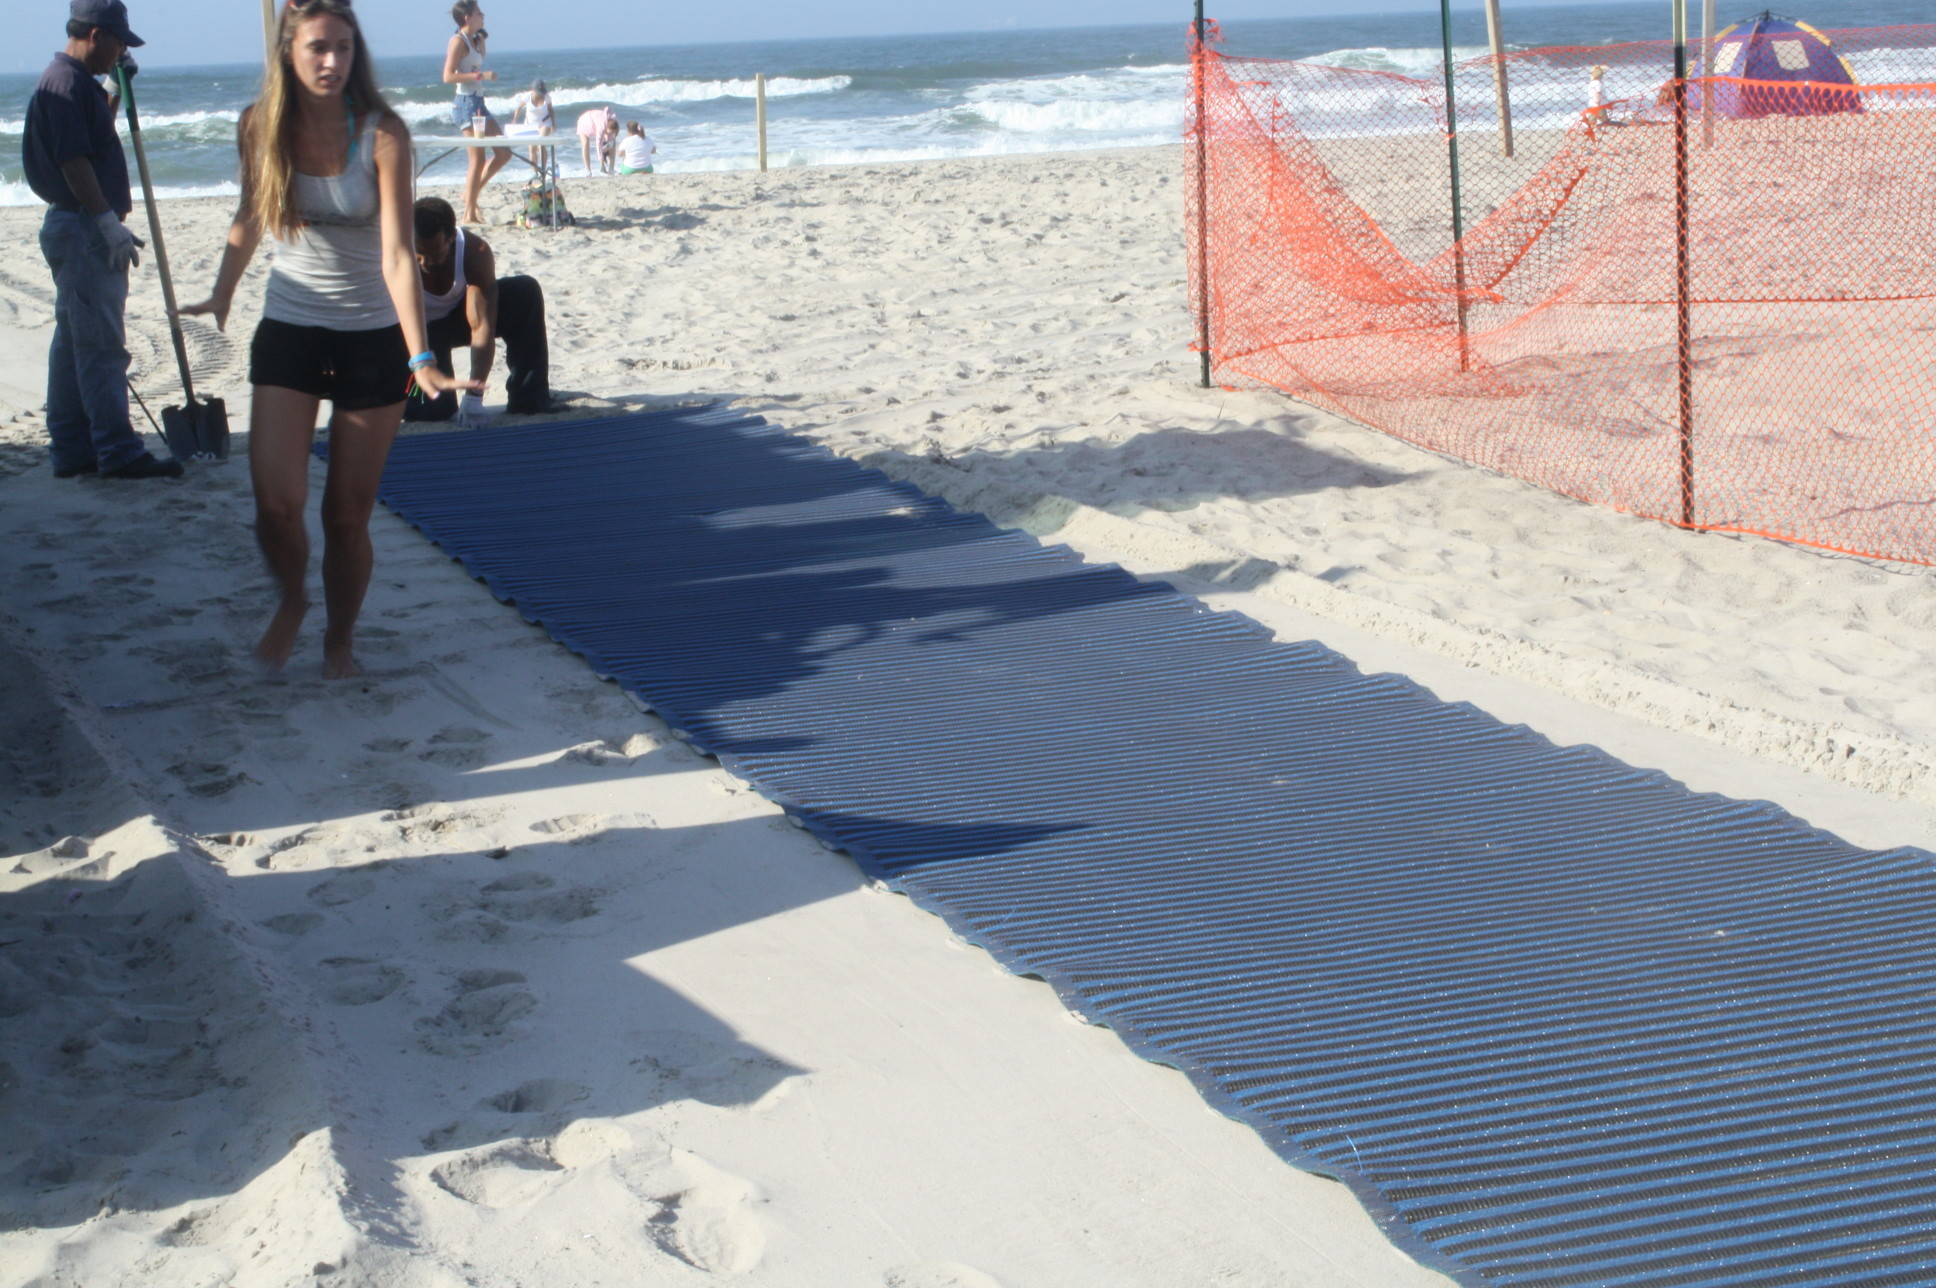 The mobility mats in years past, pictured, did not extend to the water, but the city is installing longer-extending mats at four beaches this summer.